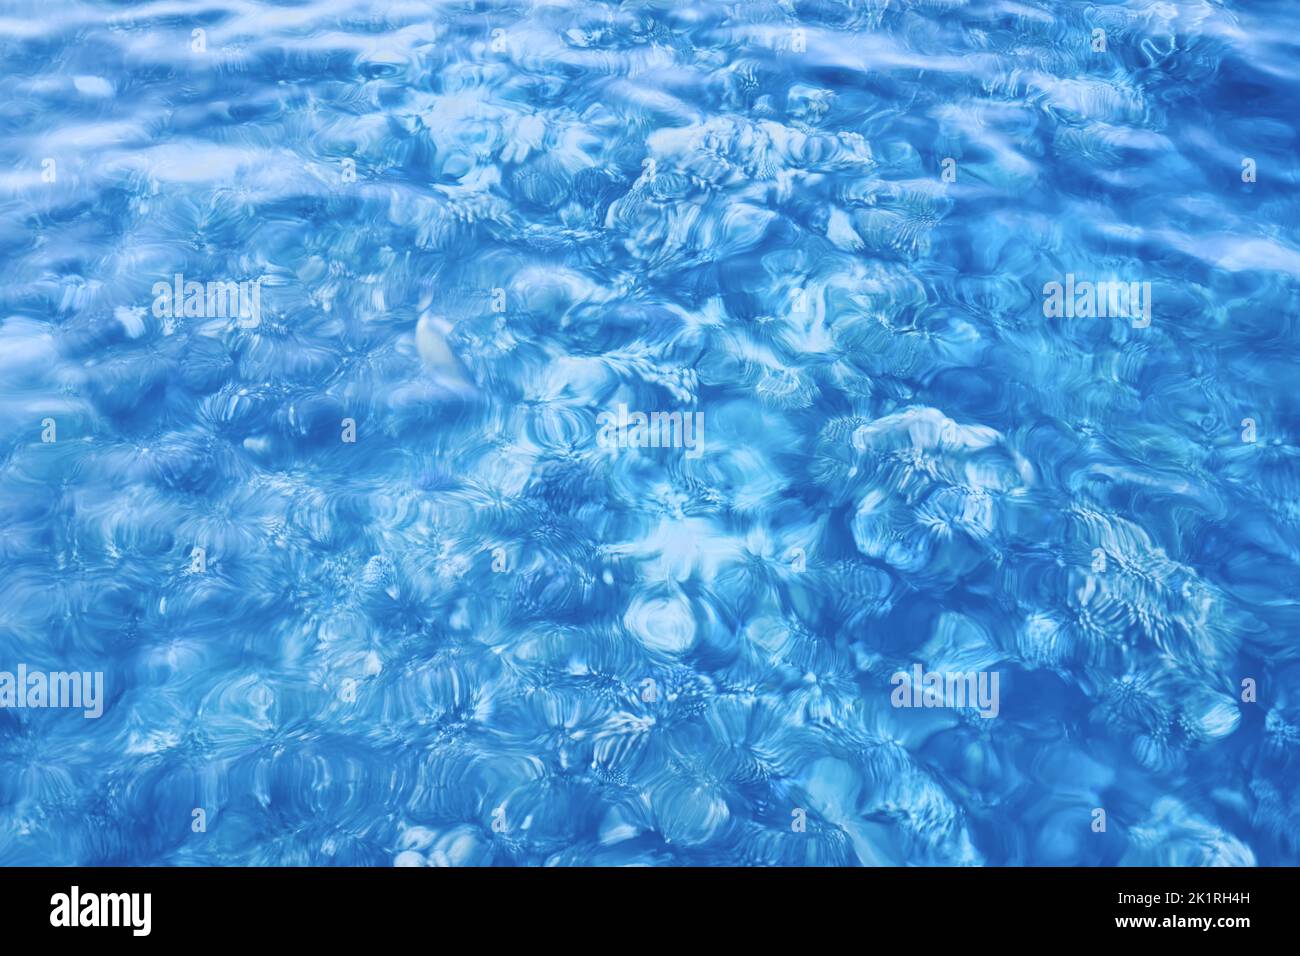 Motion blurred picture of shallow sea water, abstract nature blue background. Stock Photo